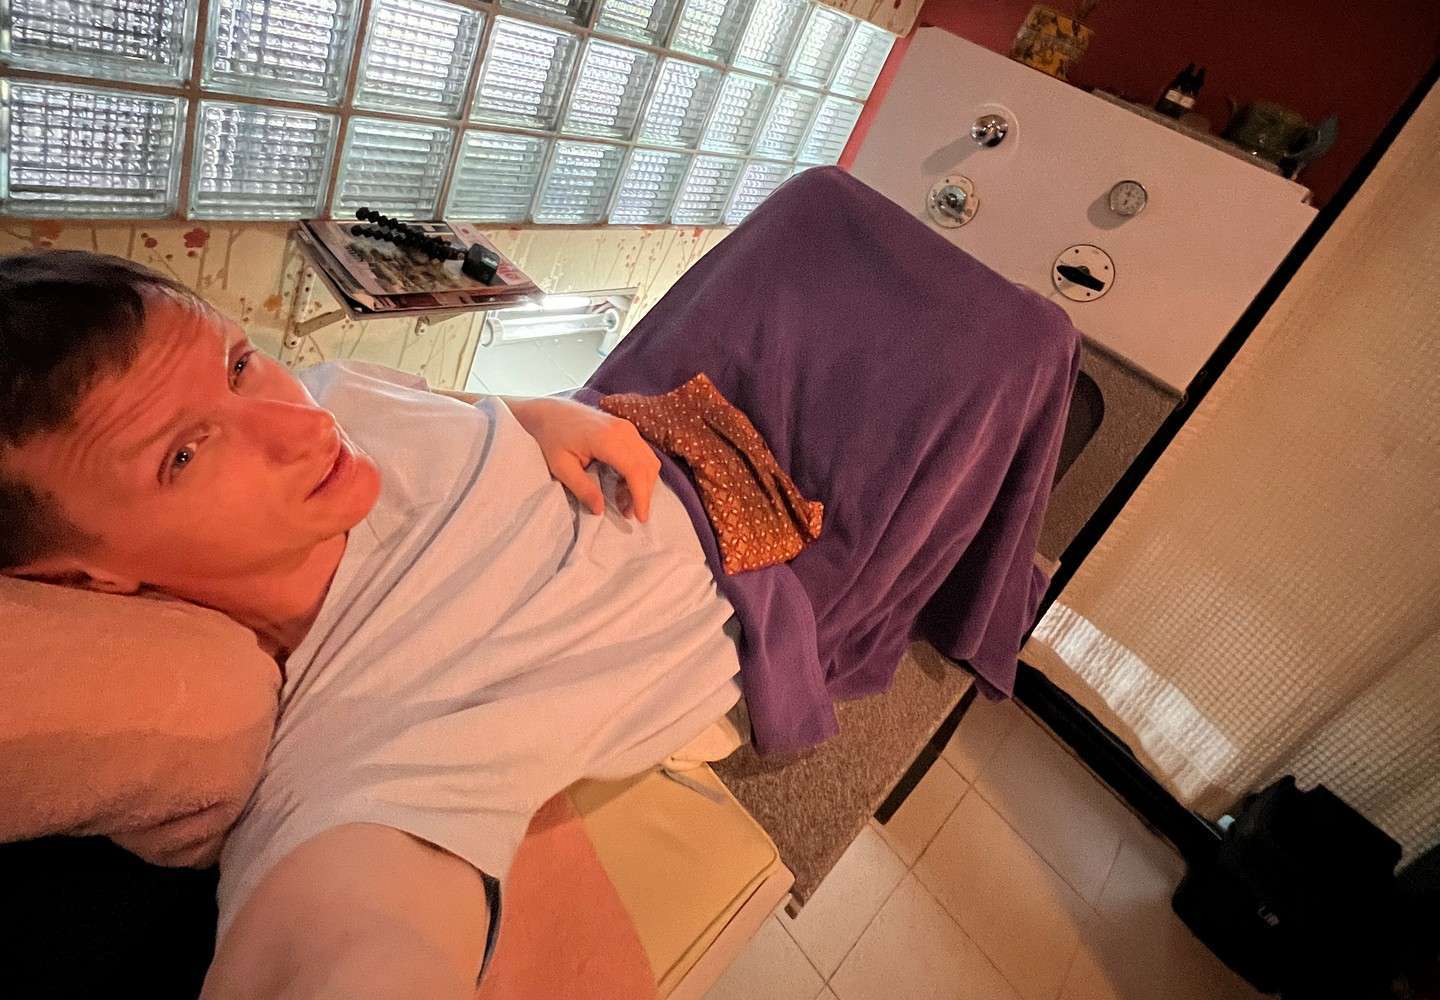 David Simpson undergoing colonic irrigation at Rasayani in Bangkok, Thailand. The day to end all days in Bangkok